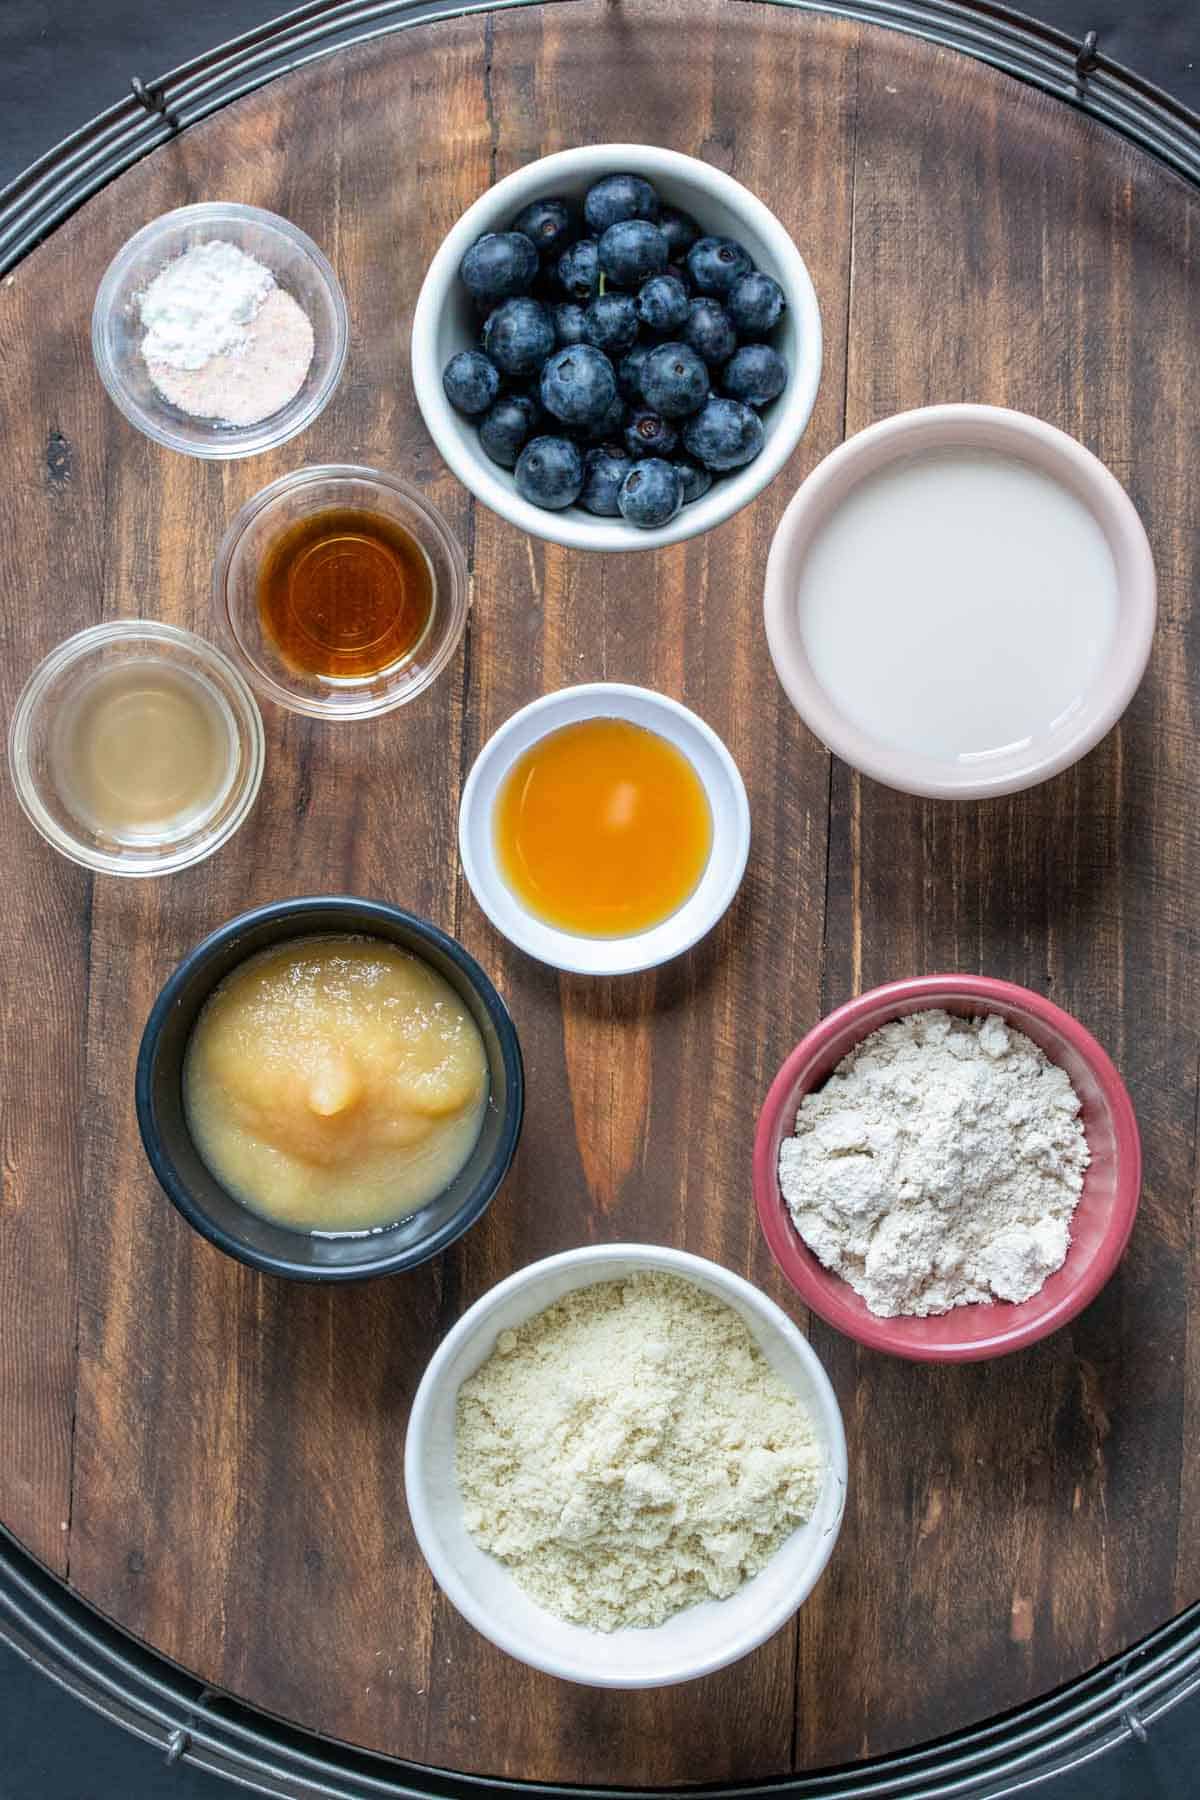 Top view of colorful bowls with ingredients to make blueberry pancakes on a wooden surface.